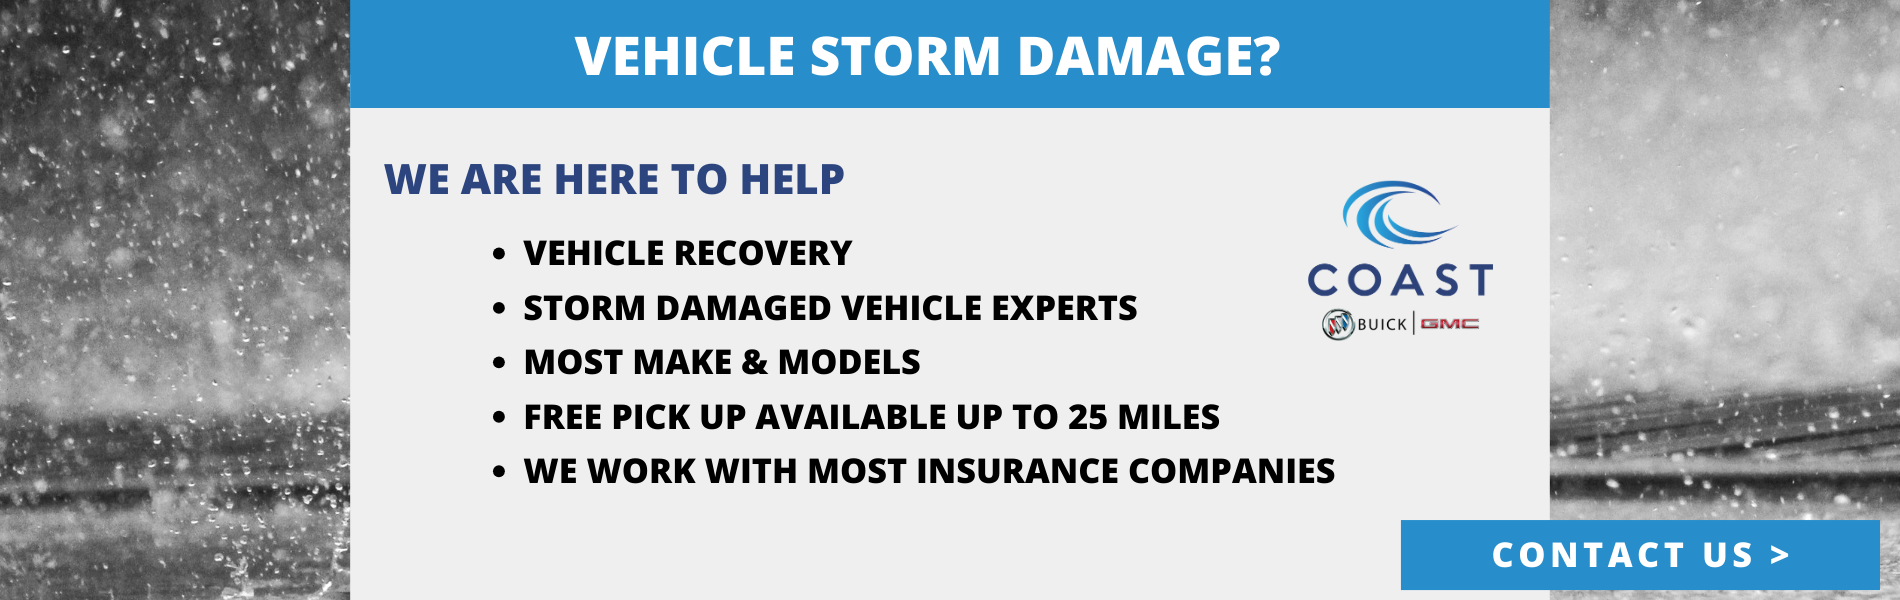 Contact Us for your Storm Damage Needs